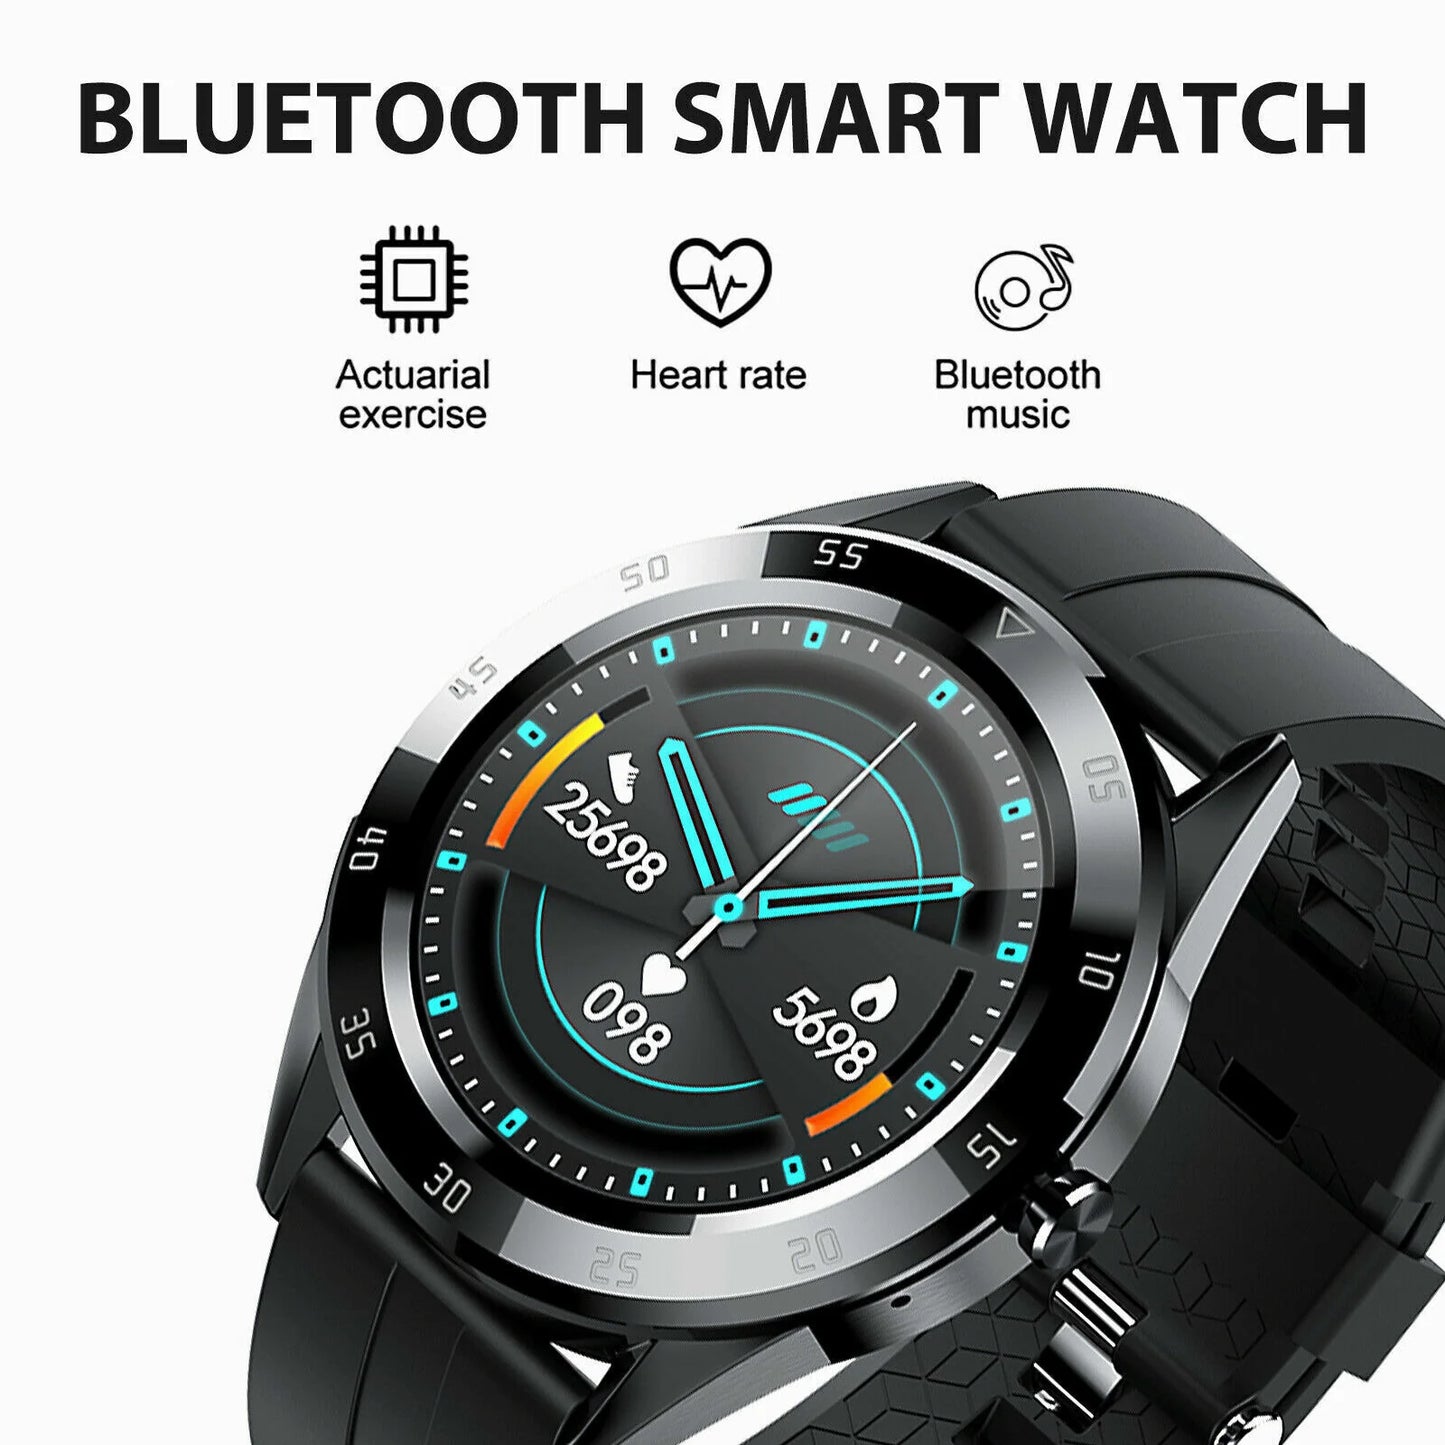 AquaTech Bluetooth Smartwatch with Heart Rate & Fitness Tracker - Bluetooth Smartwatch with heart rate and fitness tracker Readi Gear